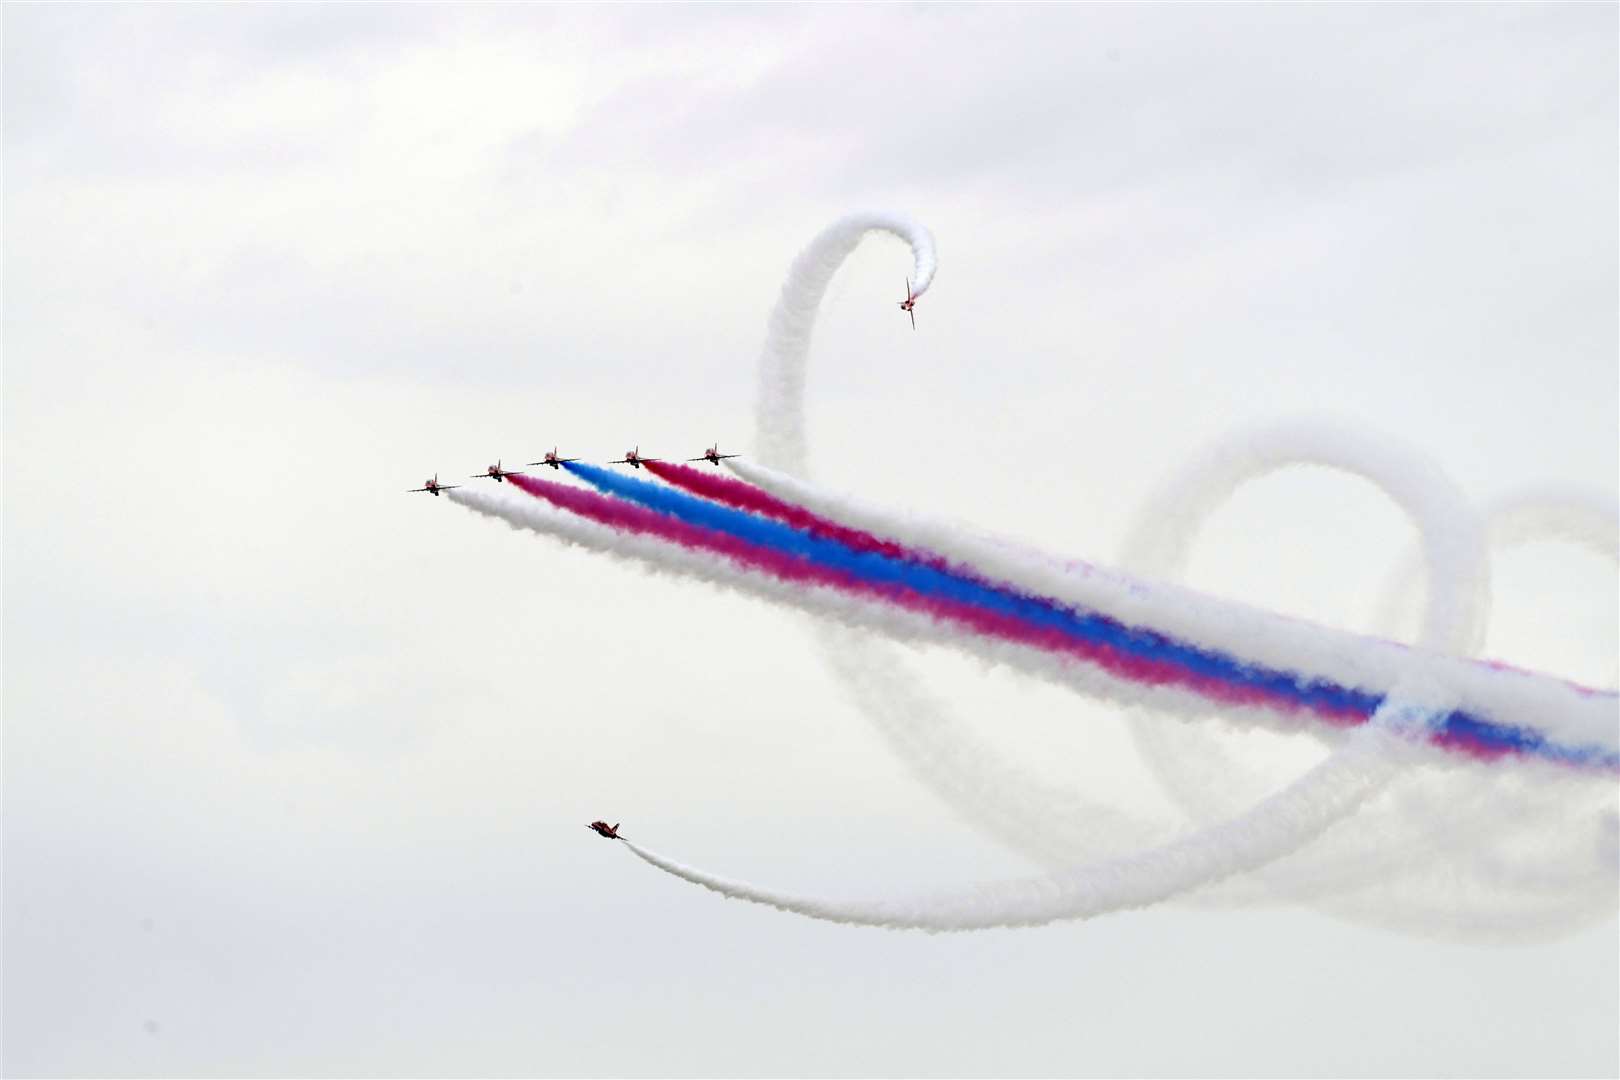 The aerial acrobatics team left red, white and blue smoke trails across the sky. Picture: Barry Goodwin